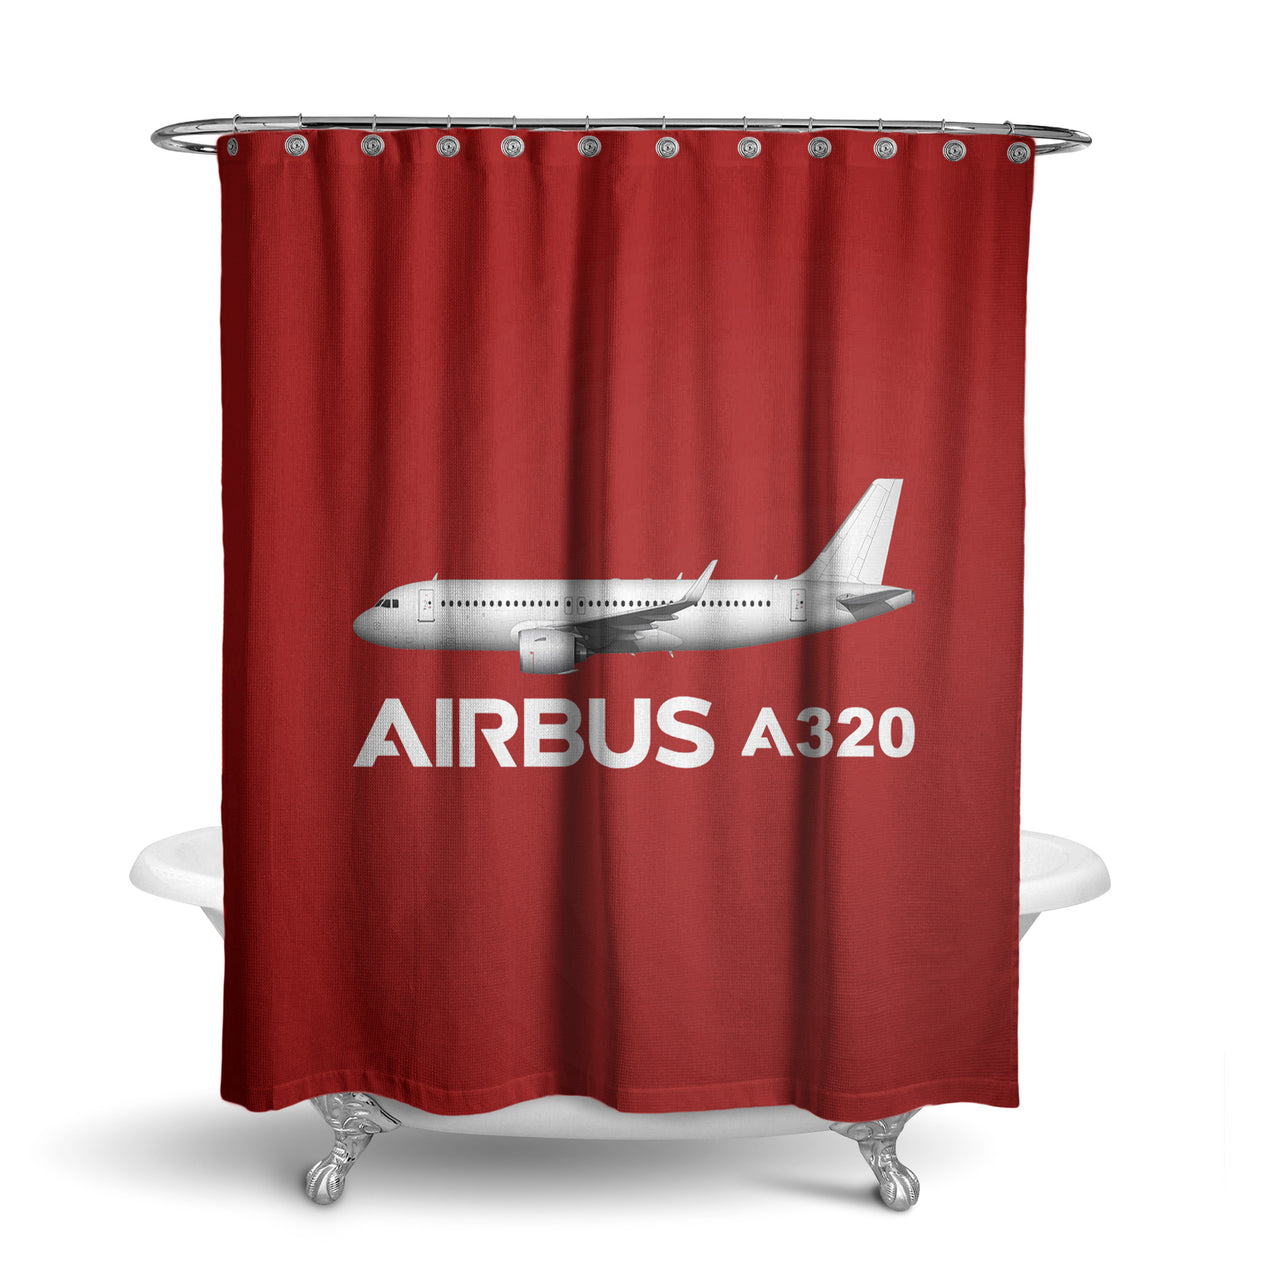 The Airbus A320 Designed Shower Curtains